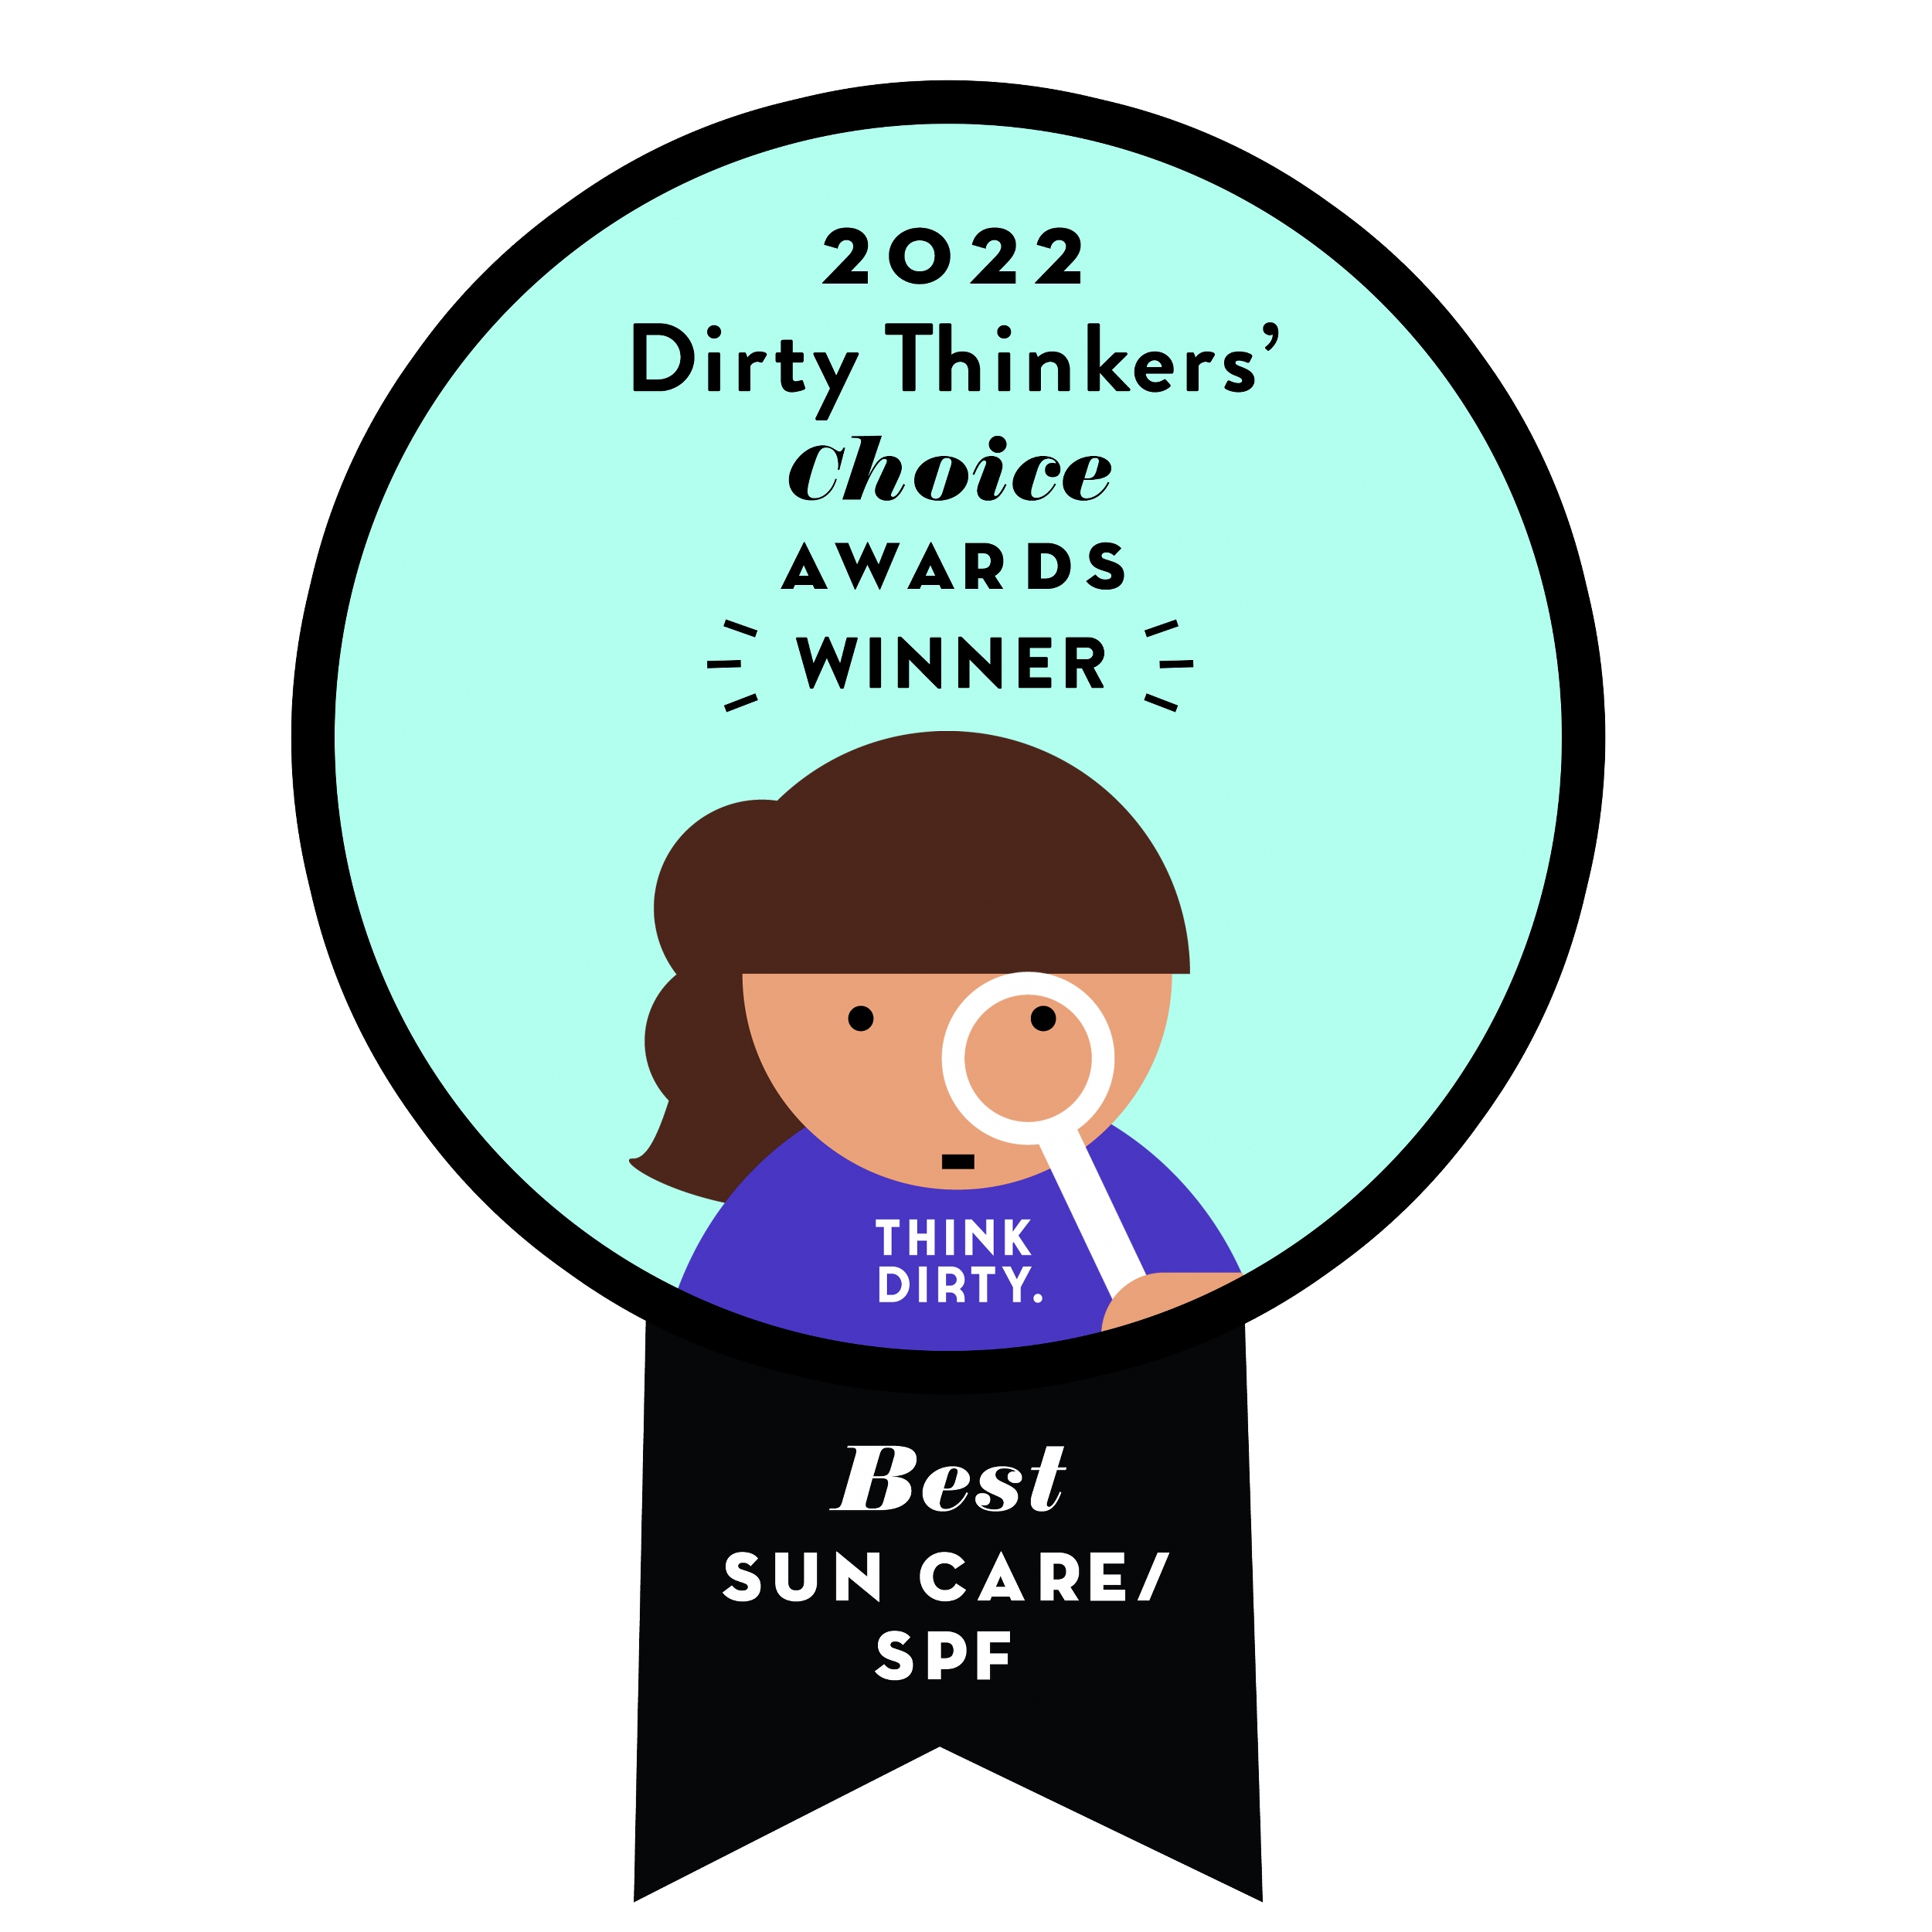 2022 Dirty Thinkers' Choice Awards Winner of Sun Care/SPF Category